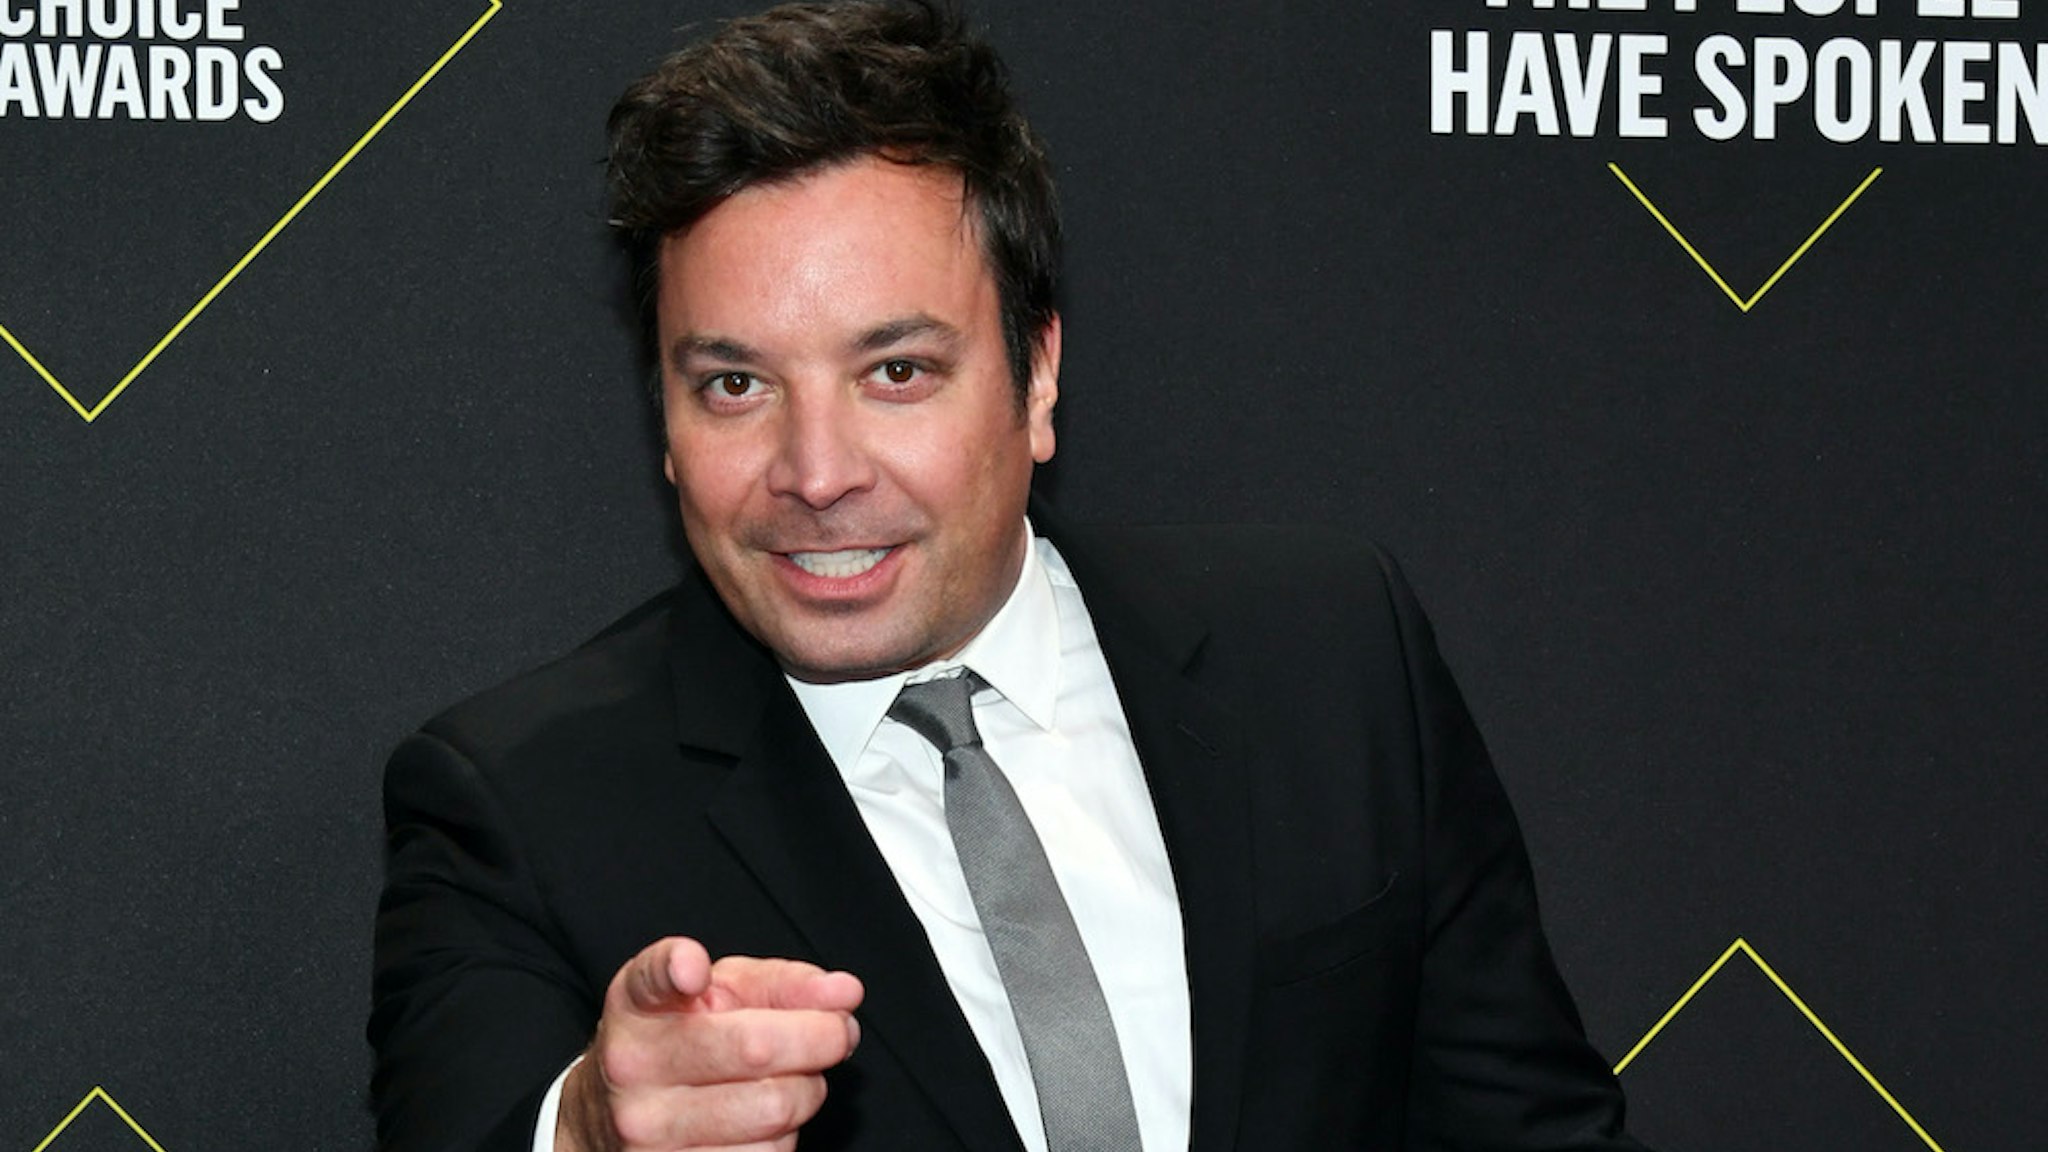 Jimmy Fallon arrives to the 2019 E! People's Choice Awards held at the Barker Hangar on November 10, 2019 -- NUP_188989 (Photo by: Amy Sussman/E! Entertainment/NBCU Photo Bank)